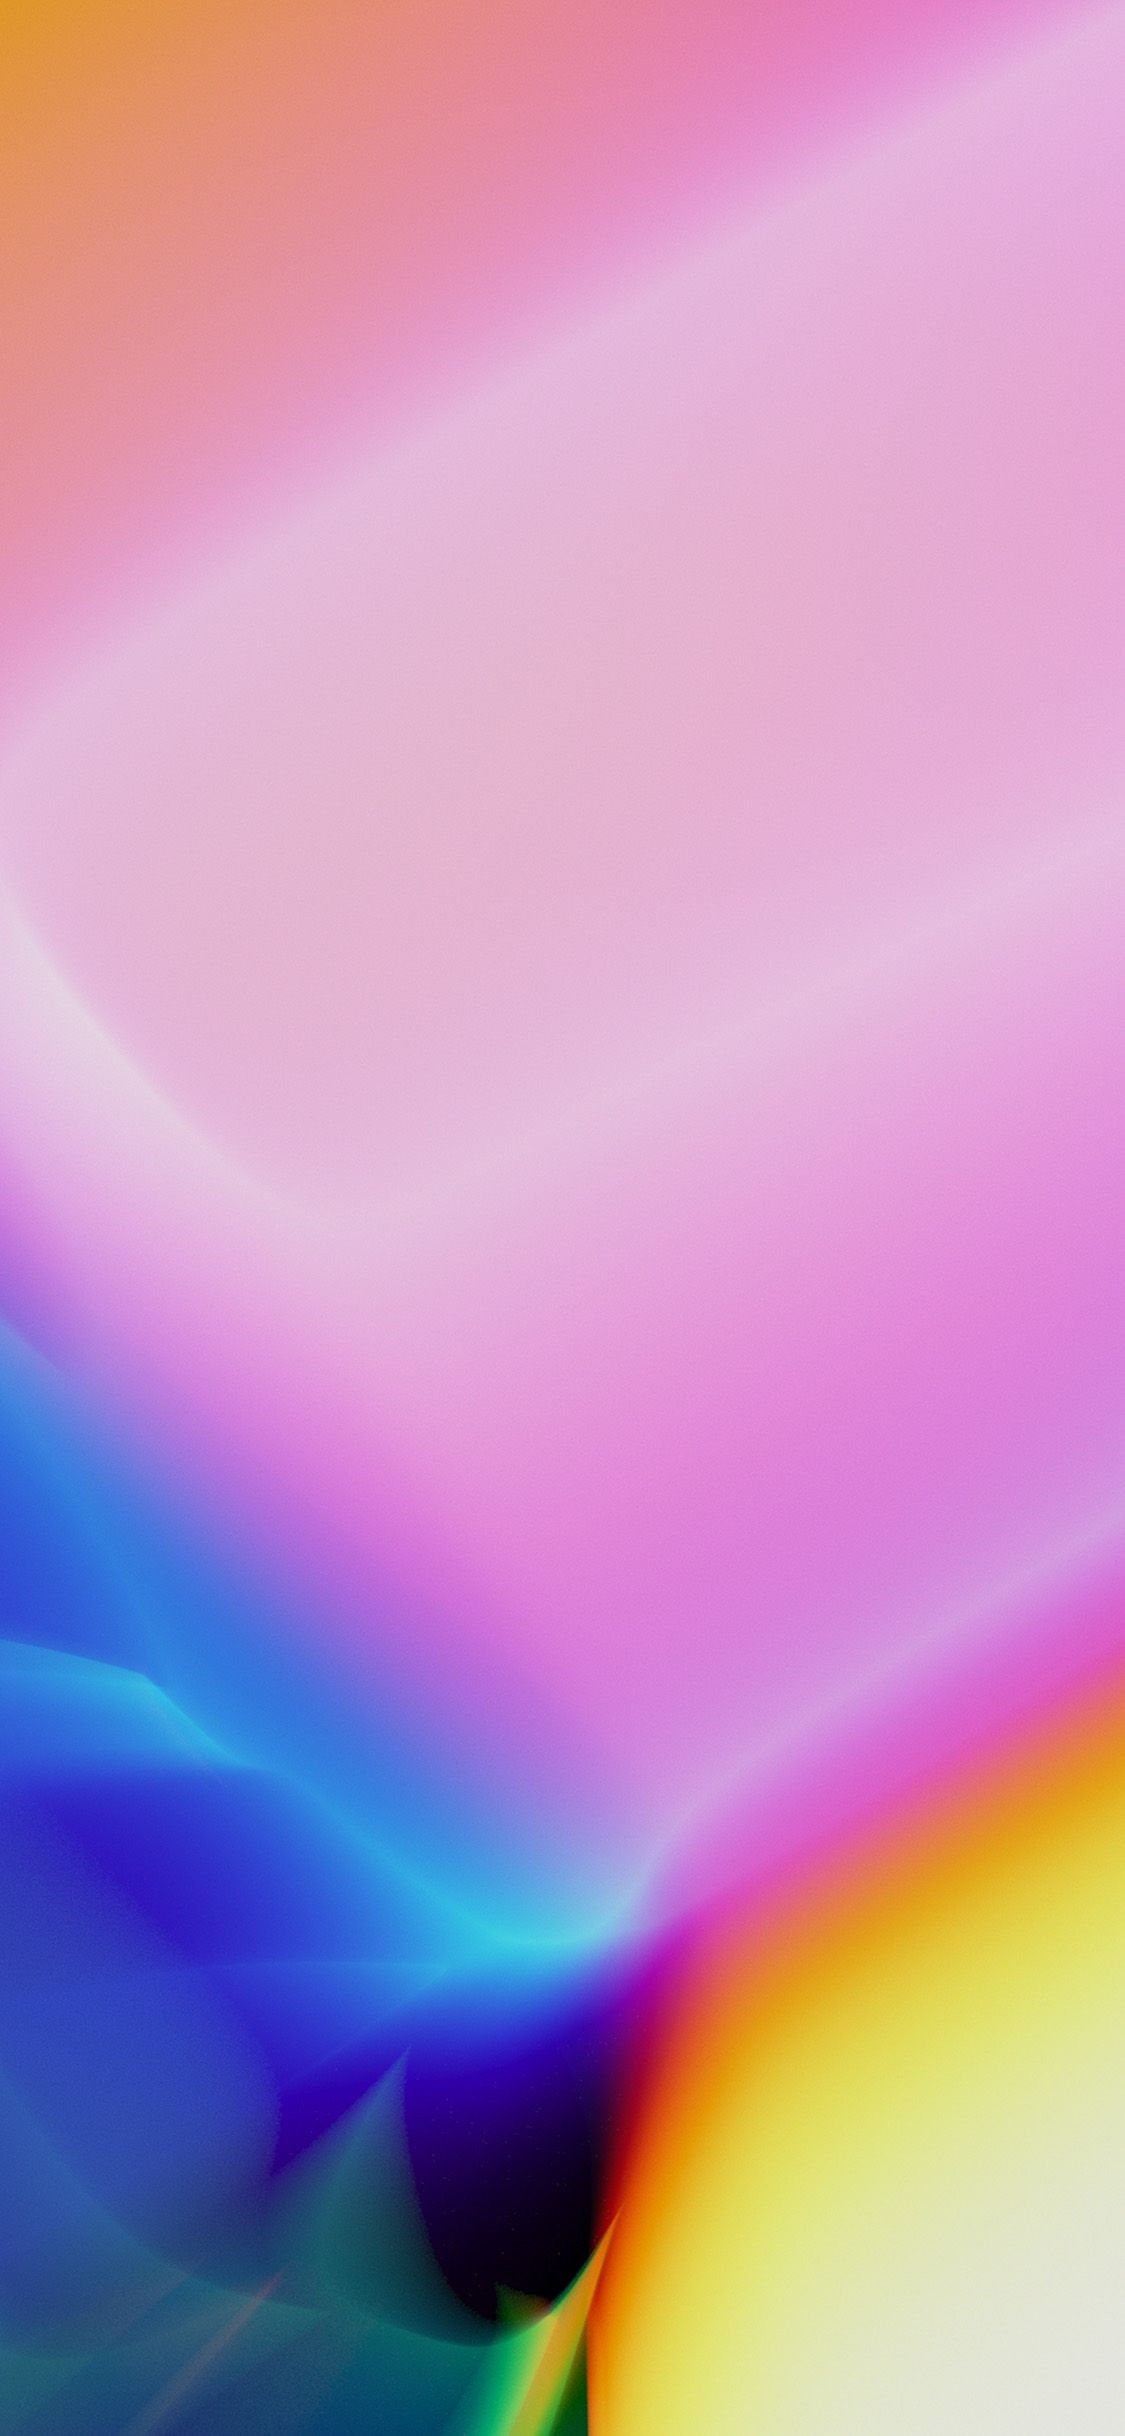 Download these color spectrum wallpaper for iPhone